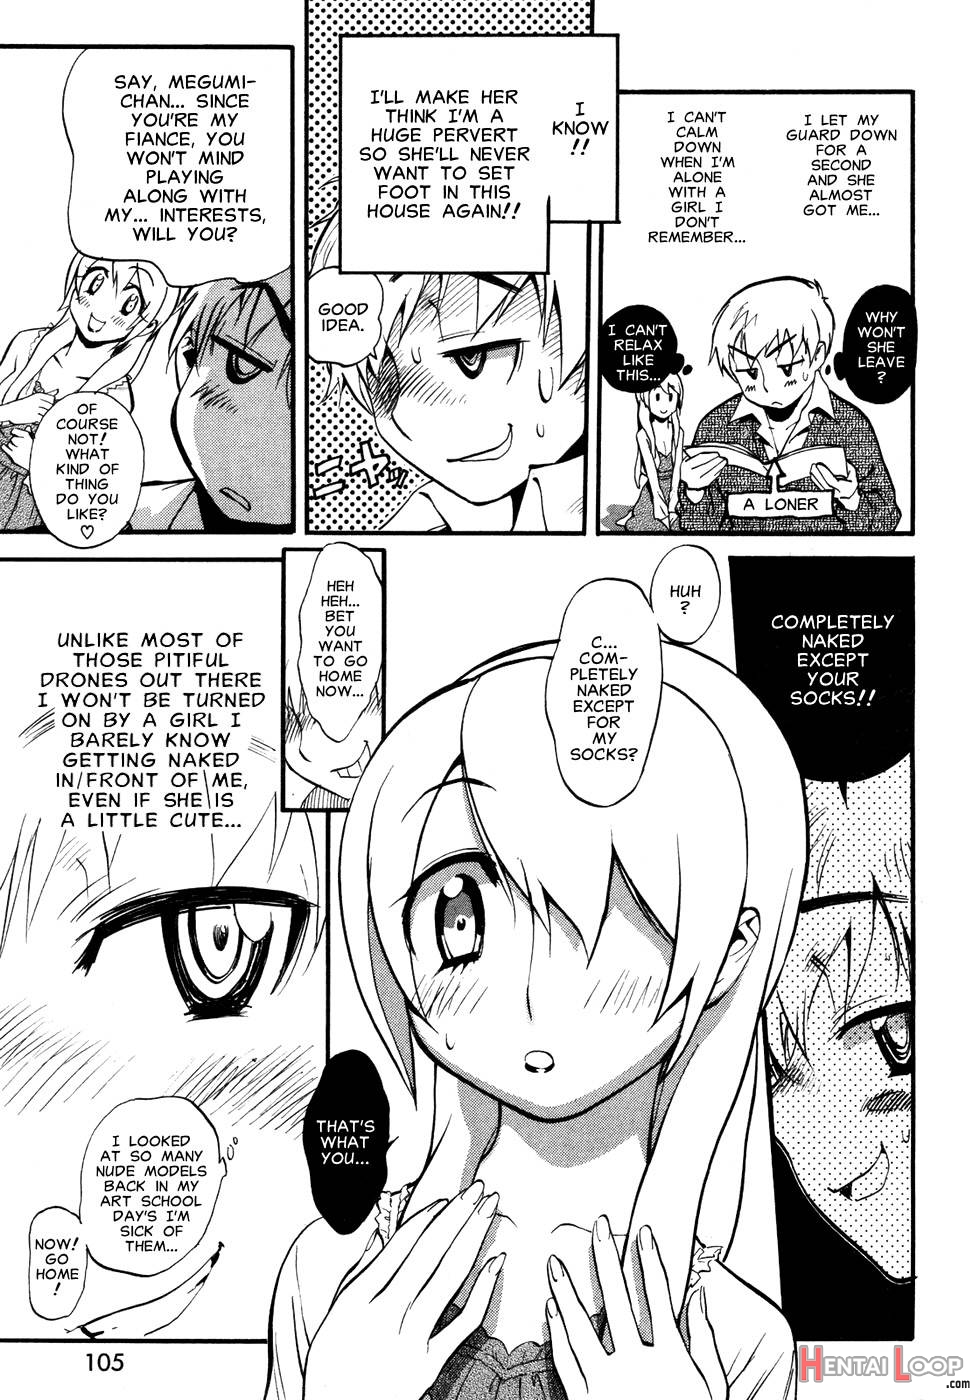 The Advent Of Megumi page 5